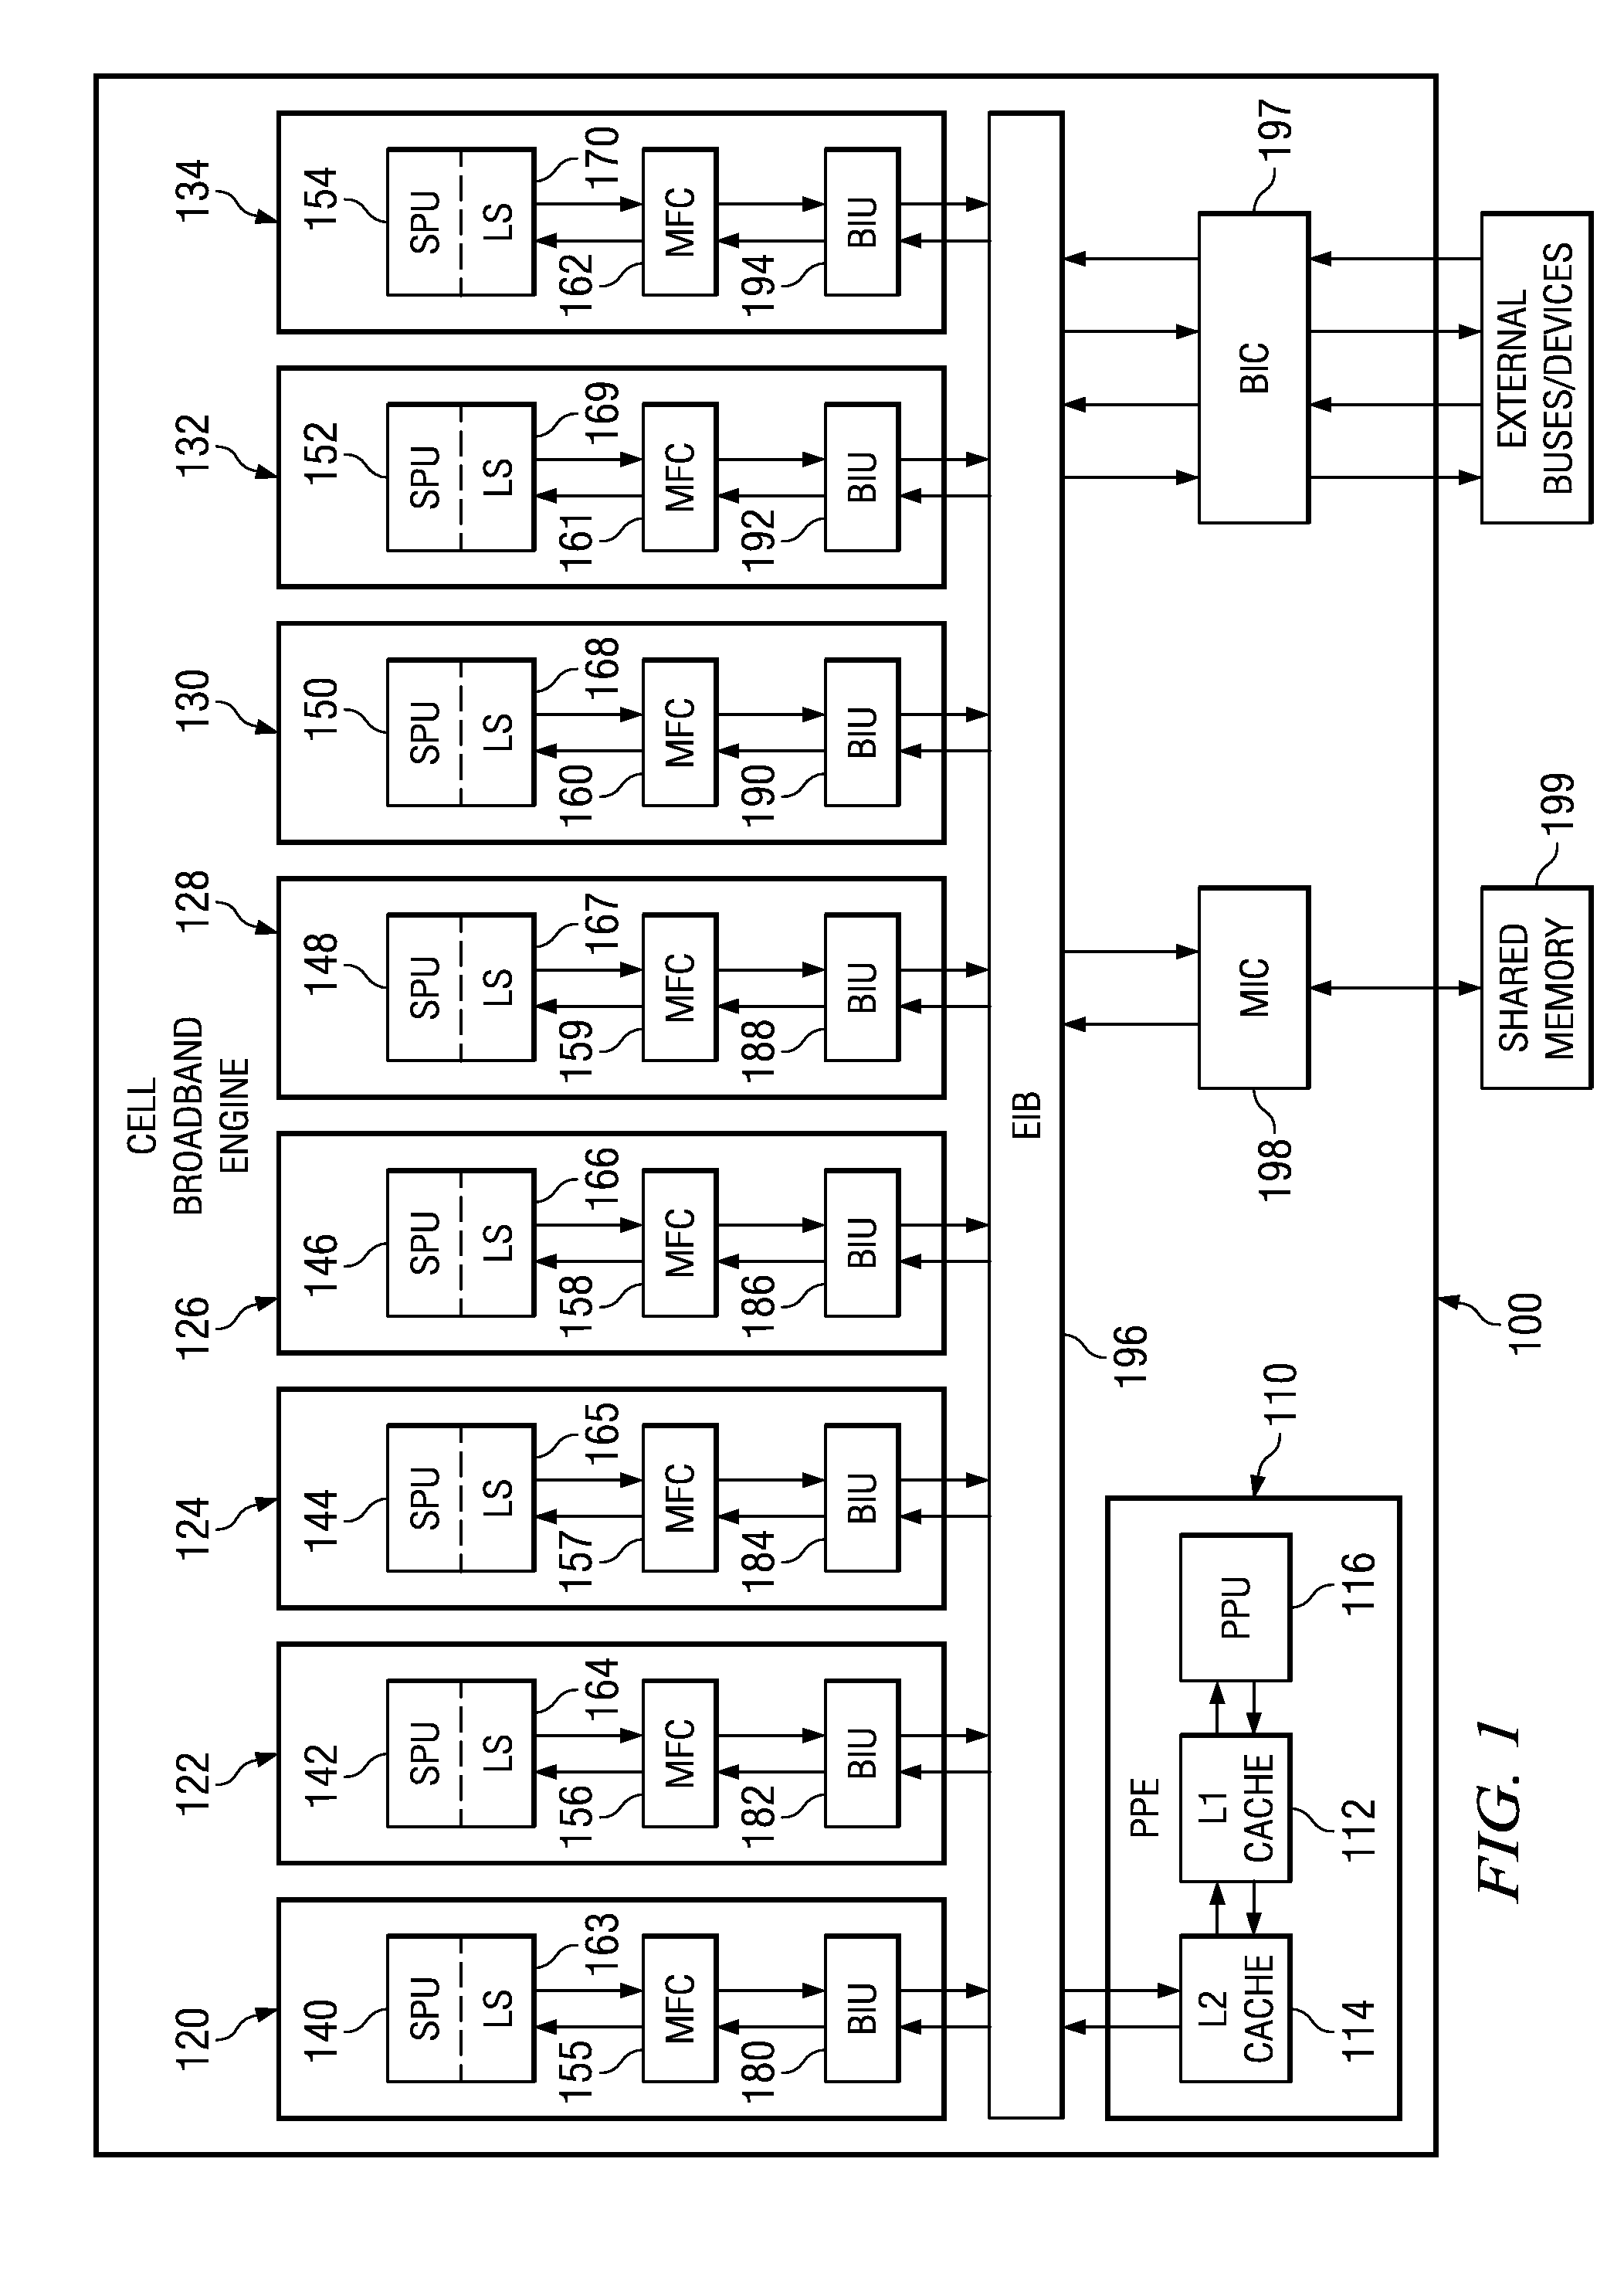 System and method for garbage collection in heterogeneous multiprocessor systems